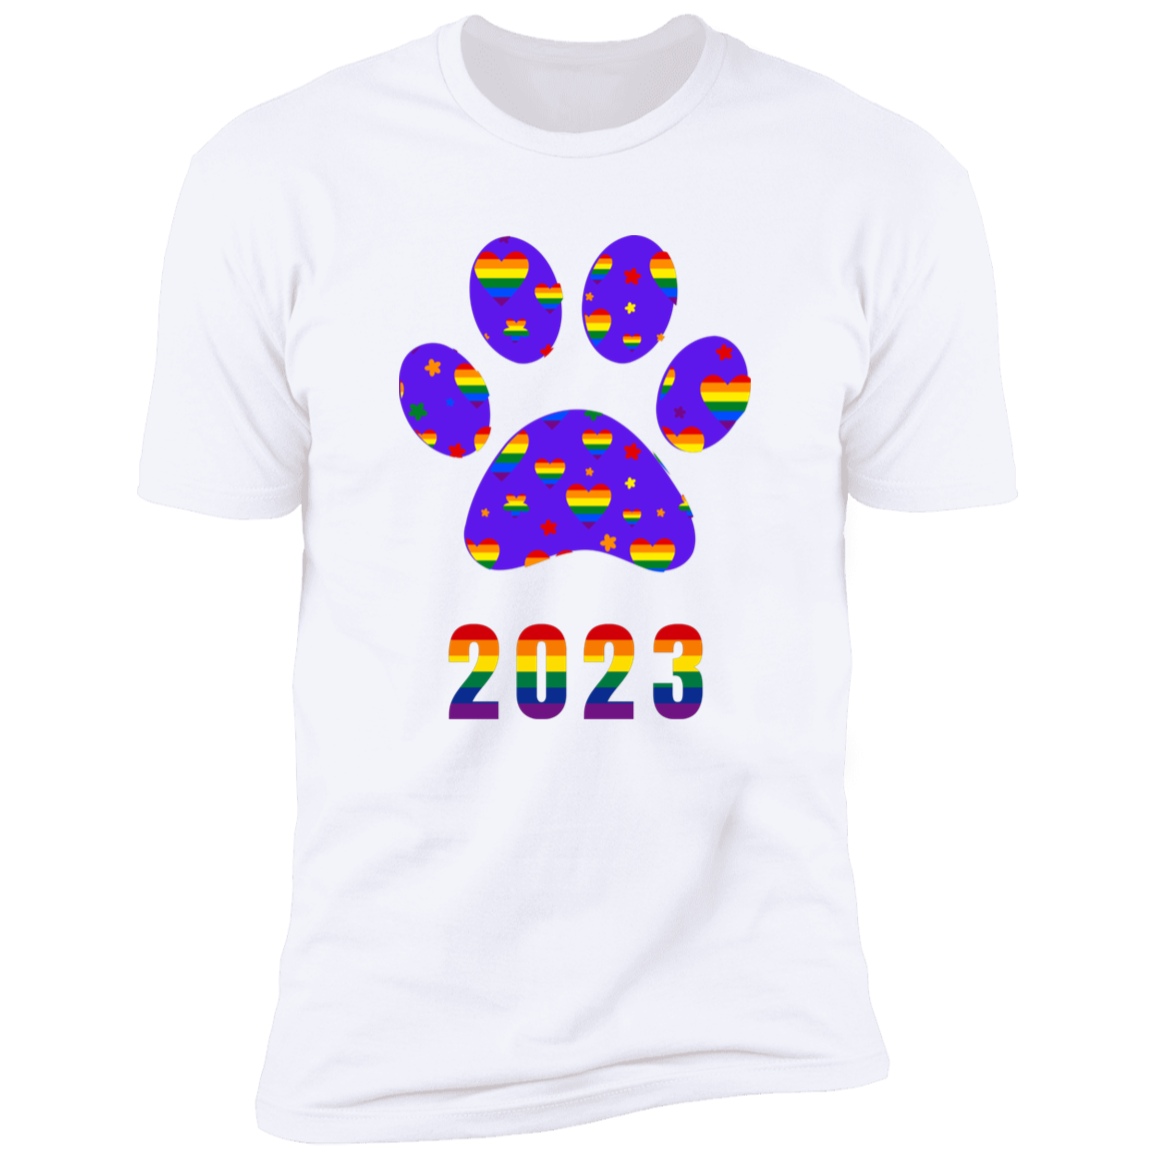 Pride Paw 2023 (Hearts) Pride T-shirt, Paw Pride Dog Shirt for humans, in white